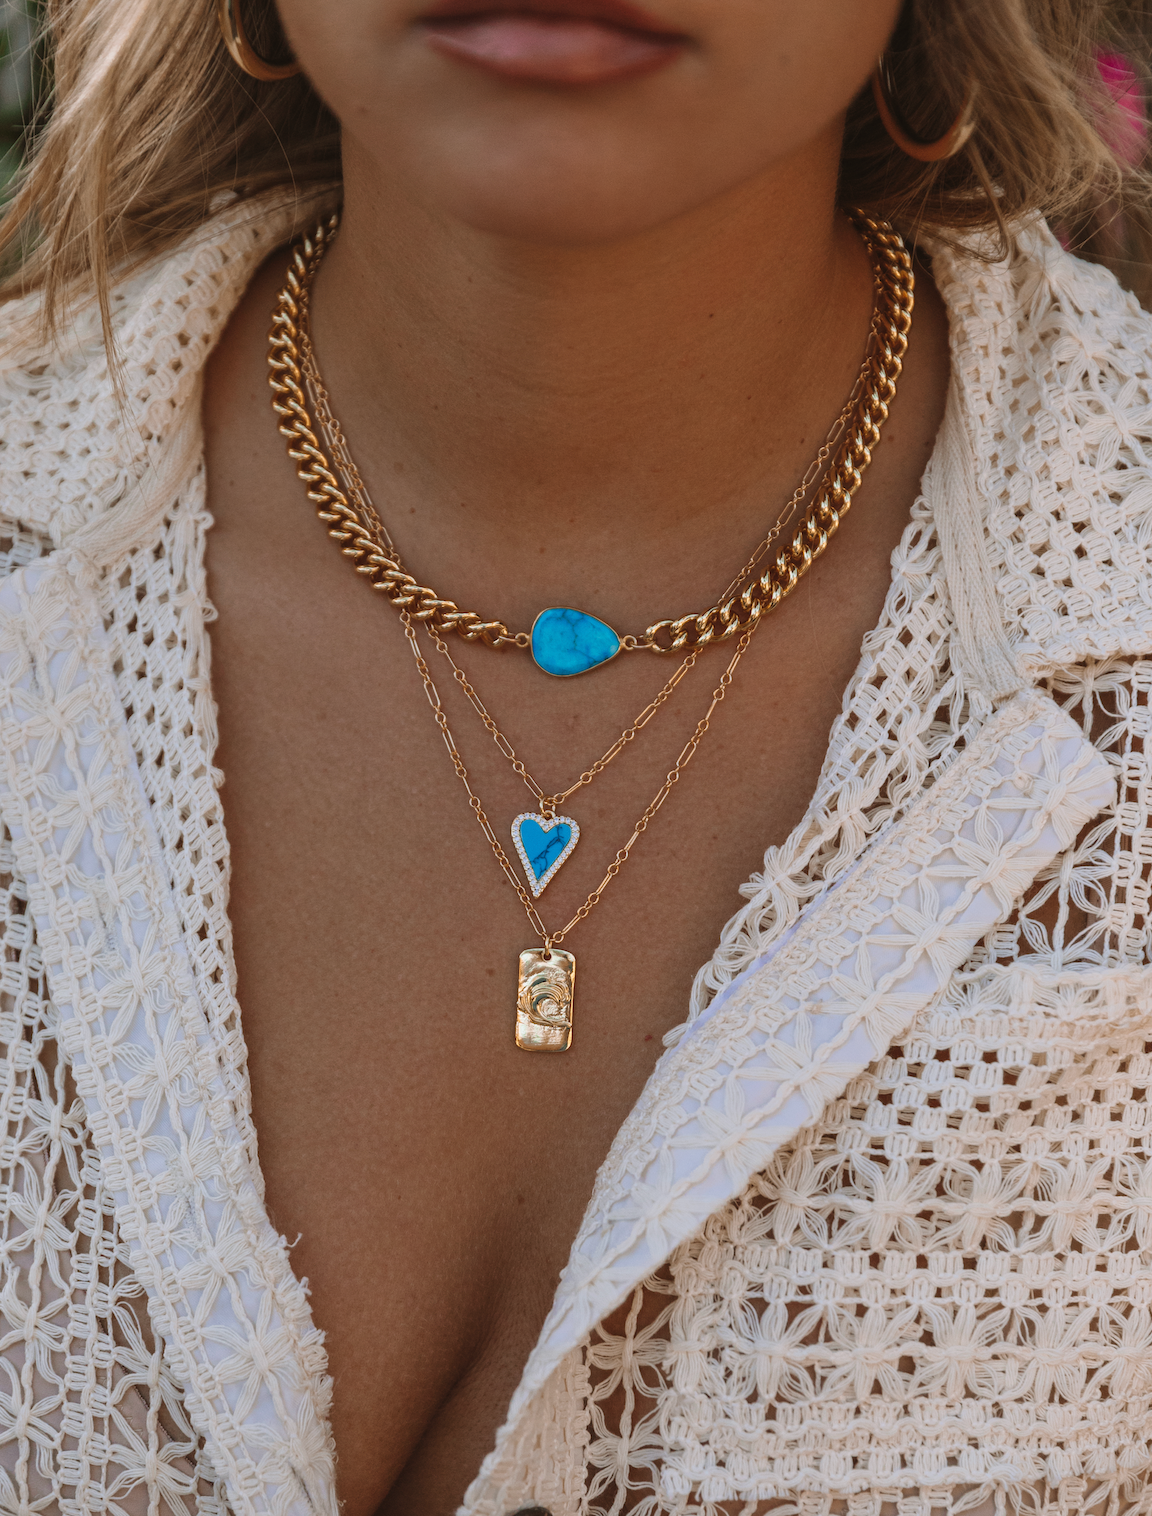 The Turquoise Cuban Necklace